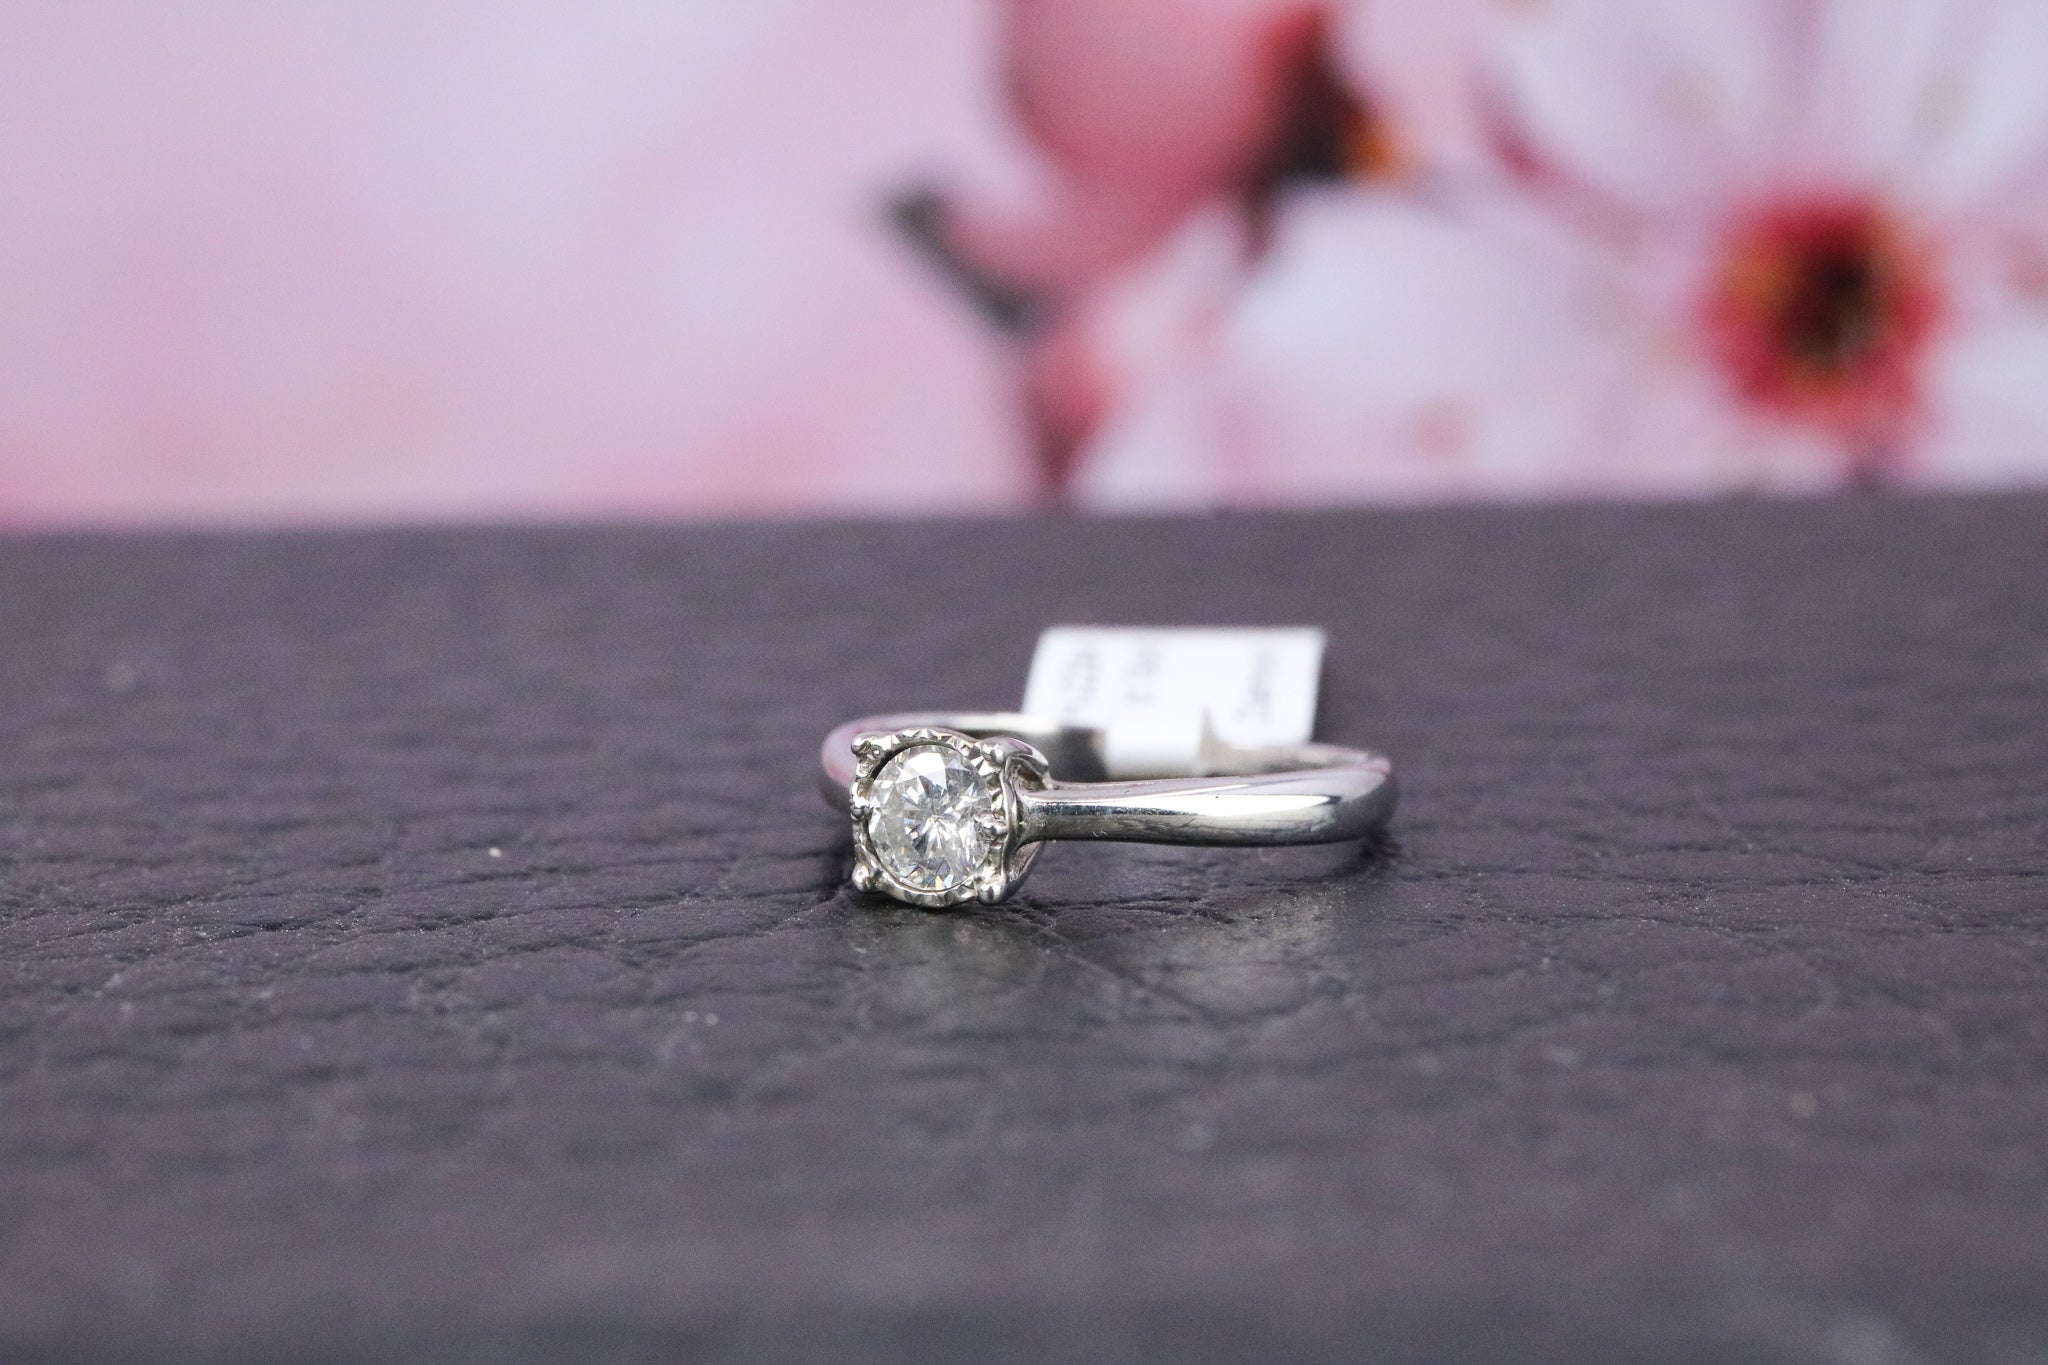 9ct White Gold Diamond Ring - HJ2284 - Hallmark Jewellers Formby & The Jewellers Bench Widnes